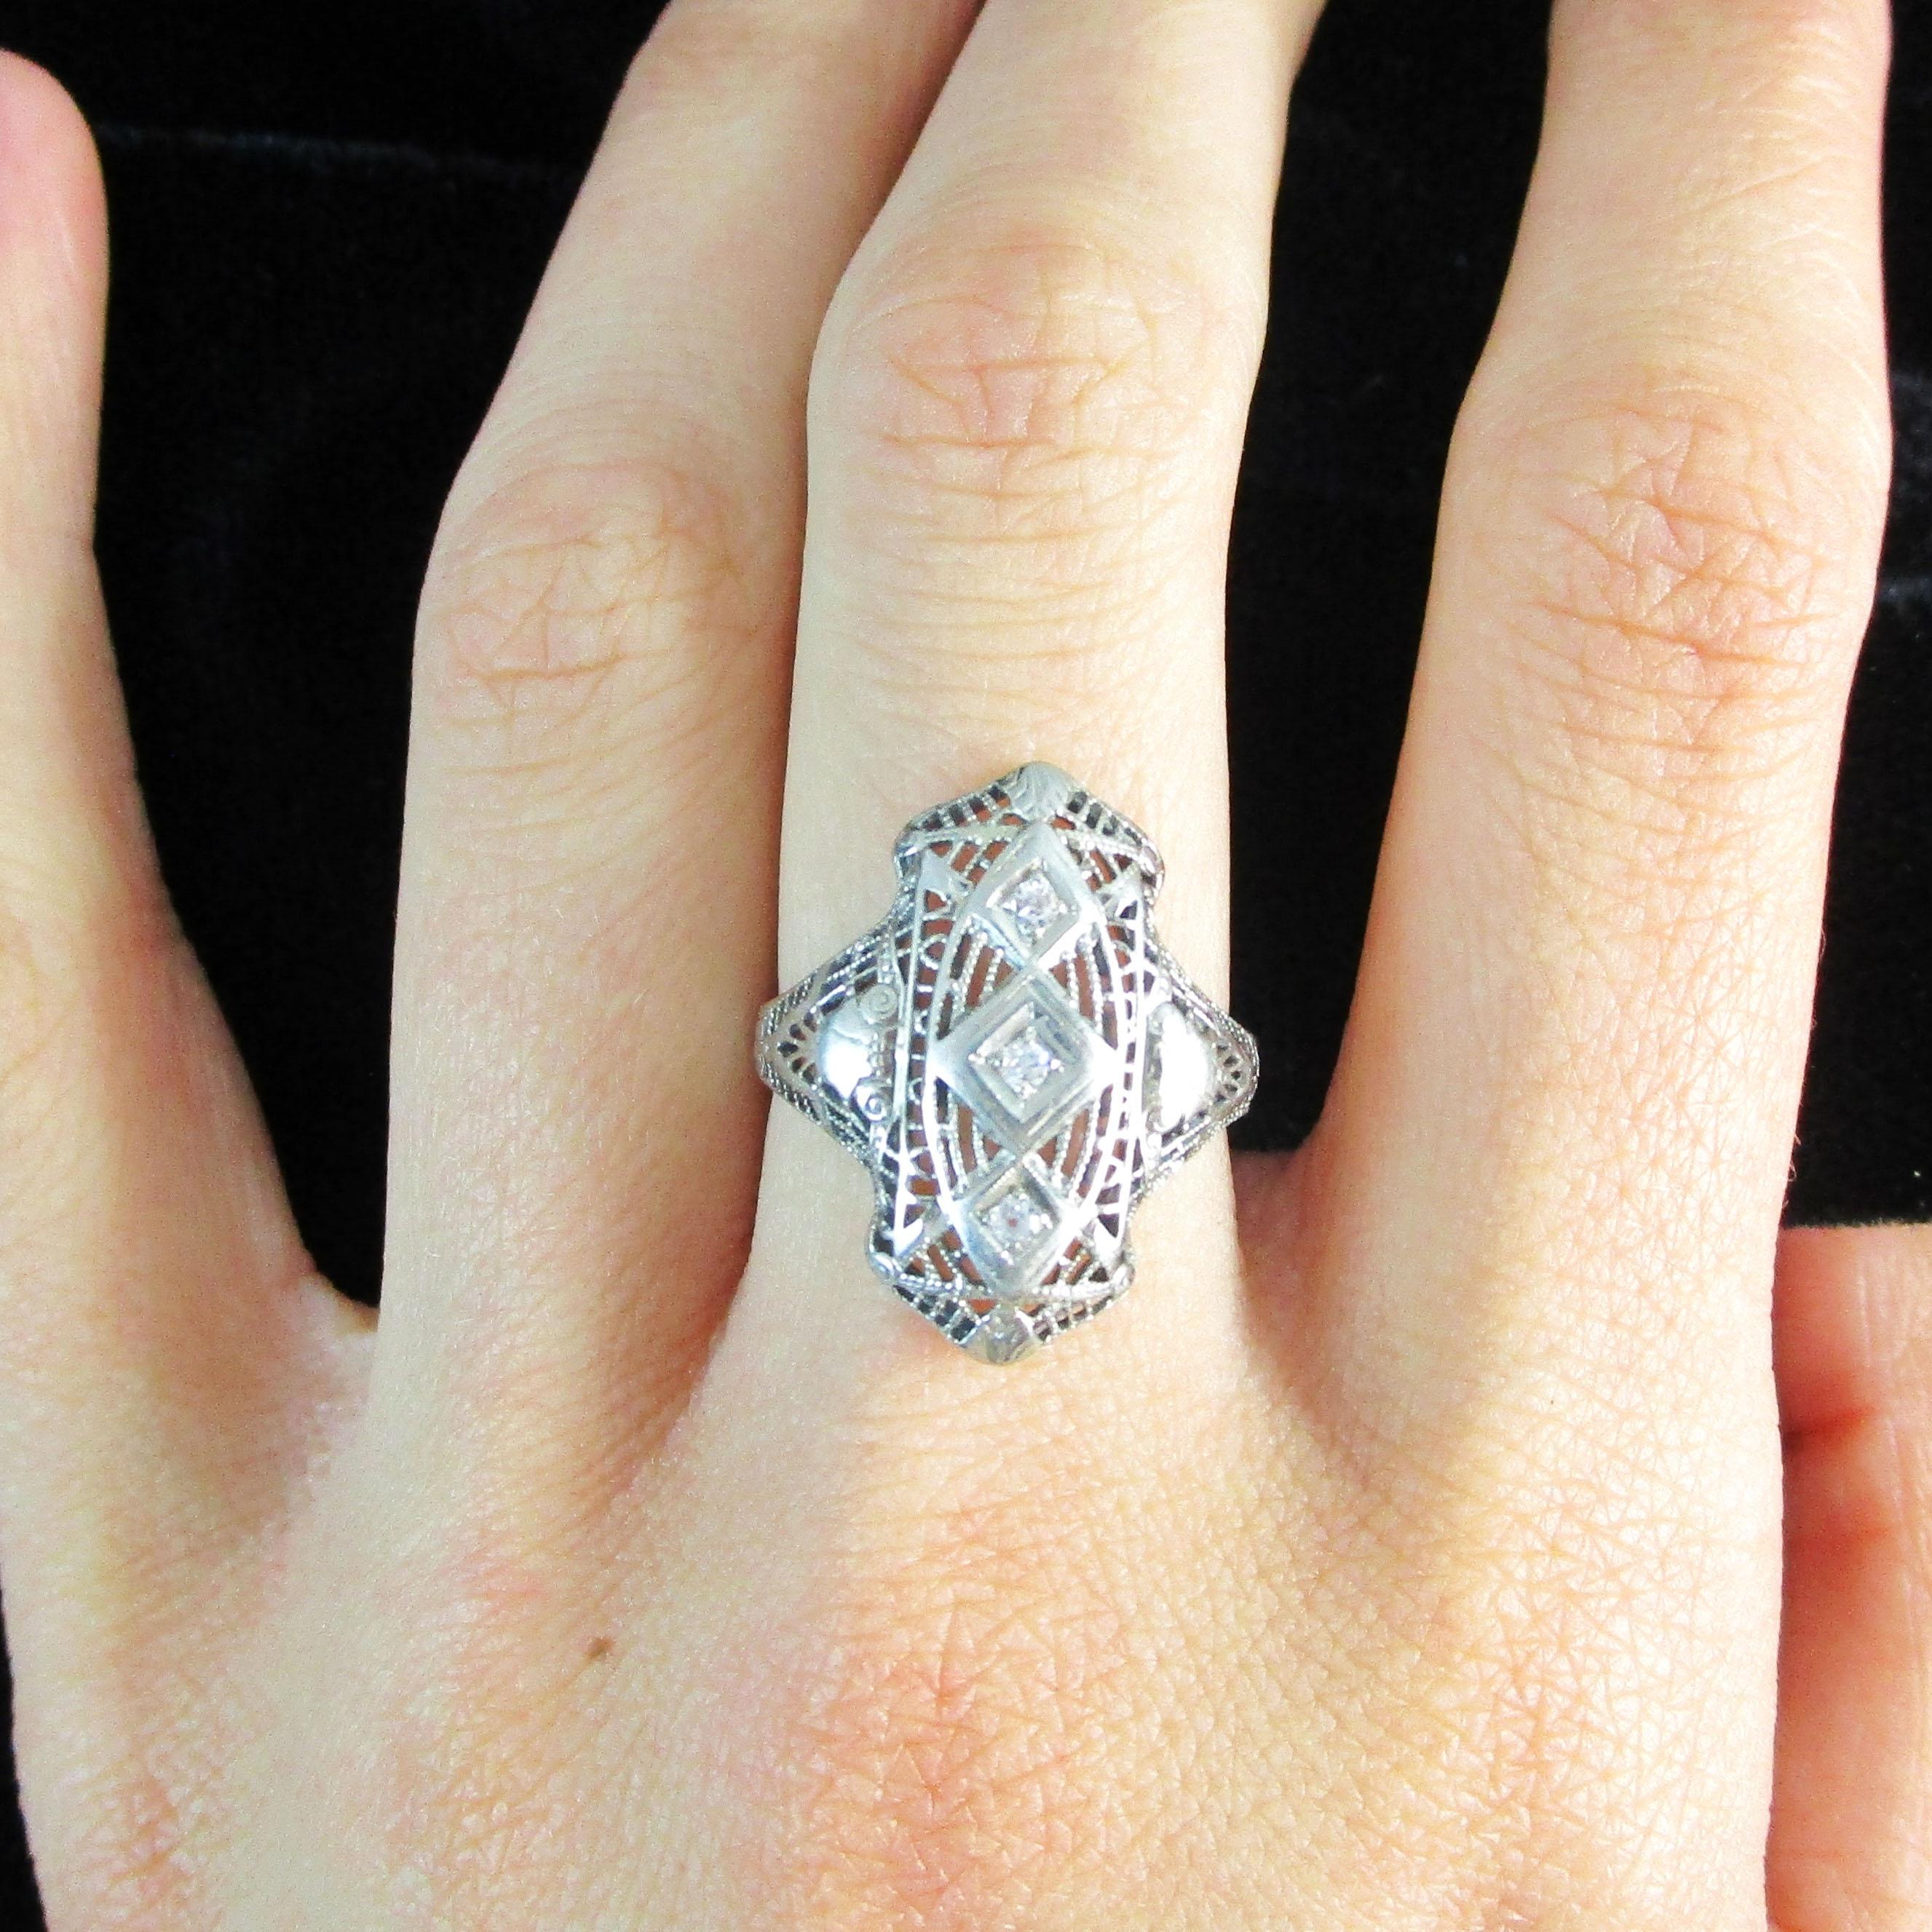 1925 Art Deco 18K White Gold Filigree Diamond Ring In Excellent Condition For Sale In Lexington, KY